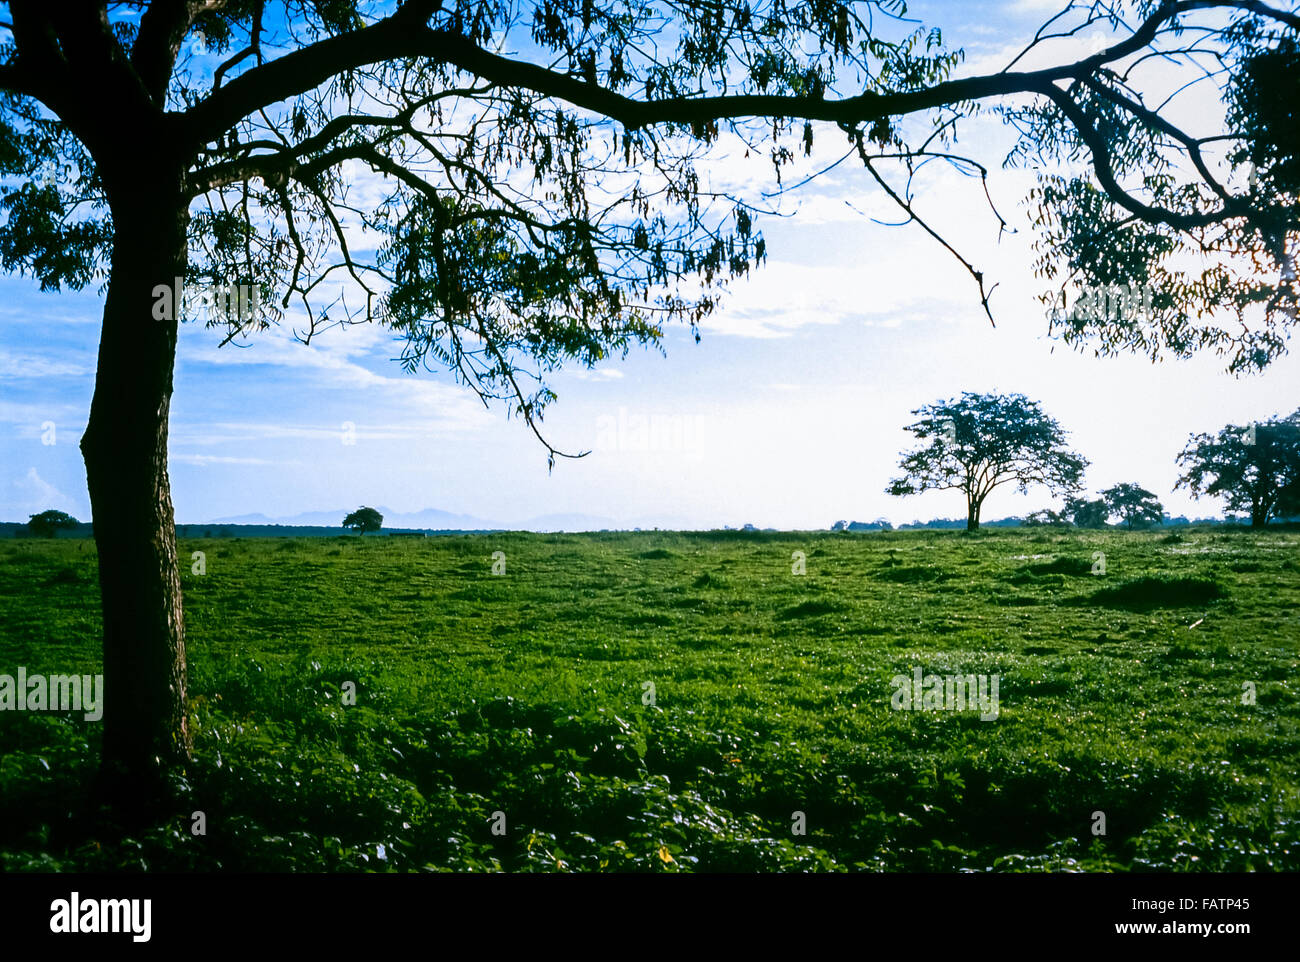 Morning dews on the green grasses and trees of tropical savanna of Bekol in Baluran National Park, Indonesia. Stock Photo